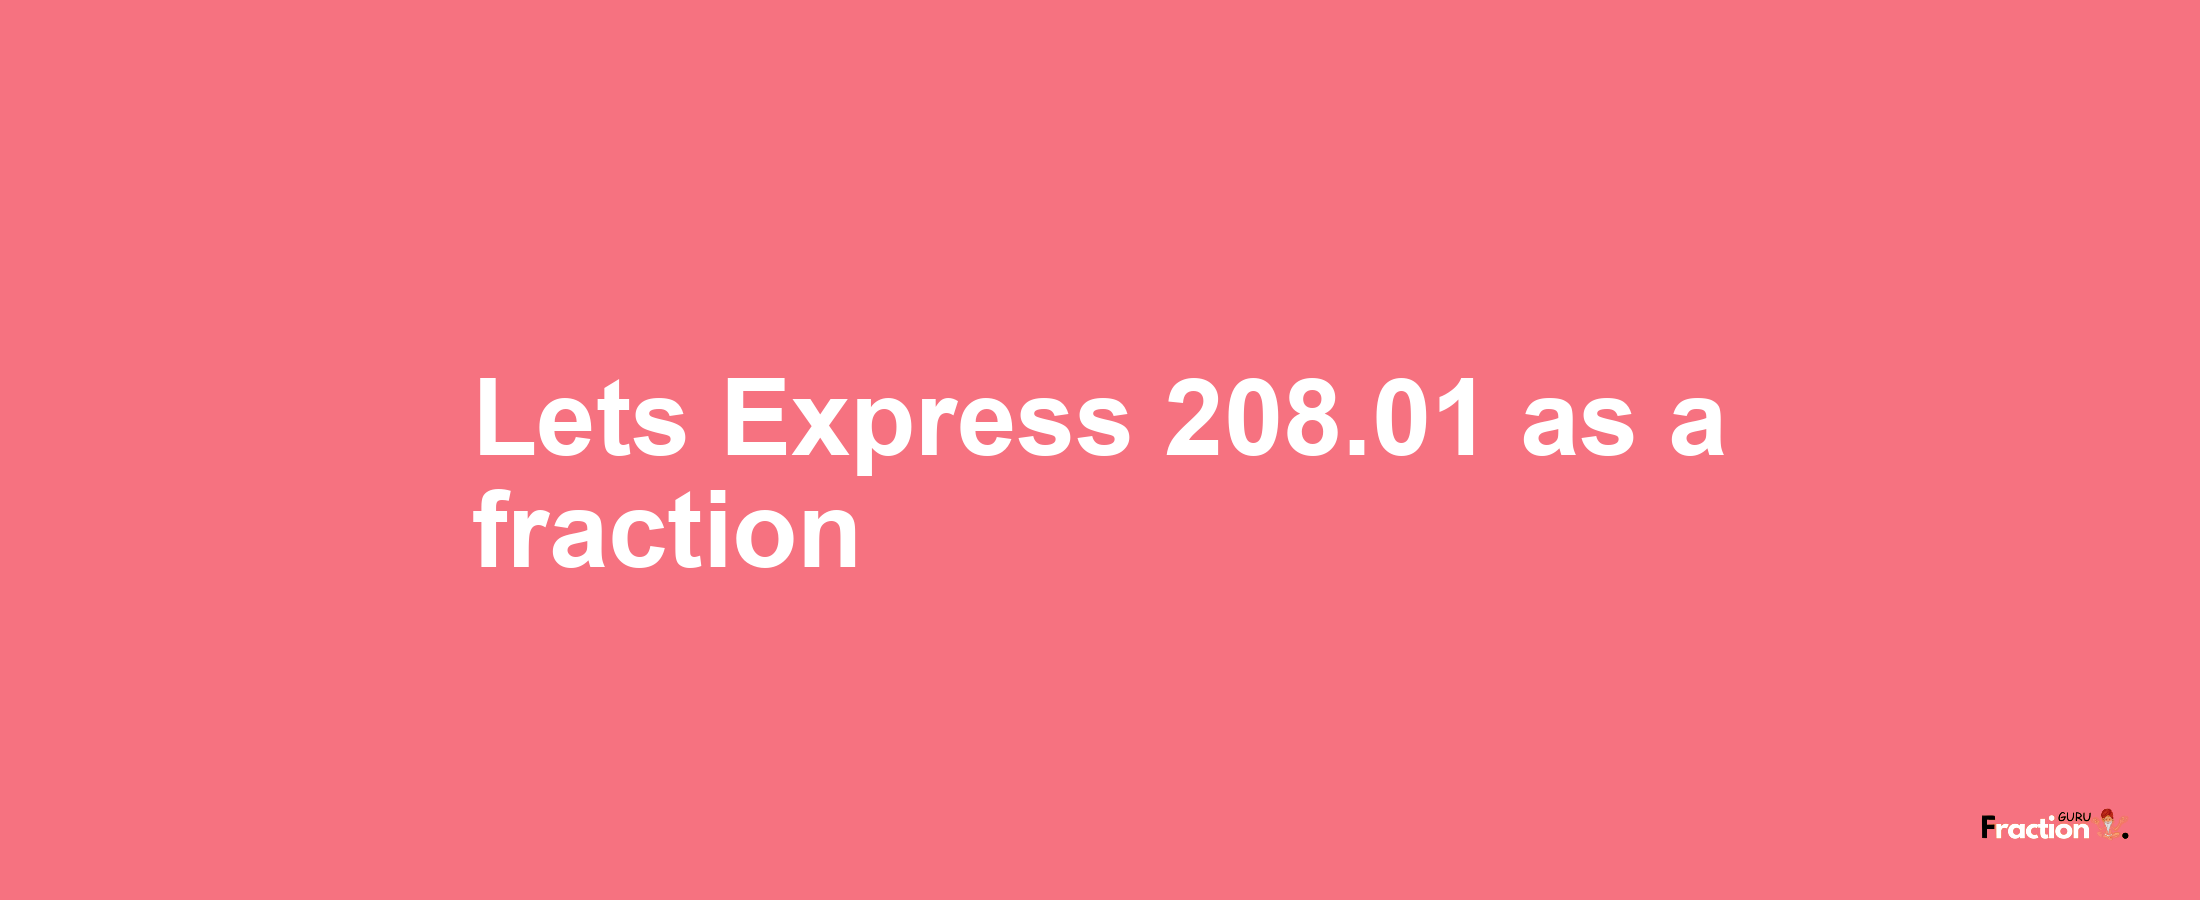 Lets Express 208.01 as afraction